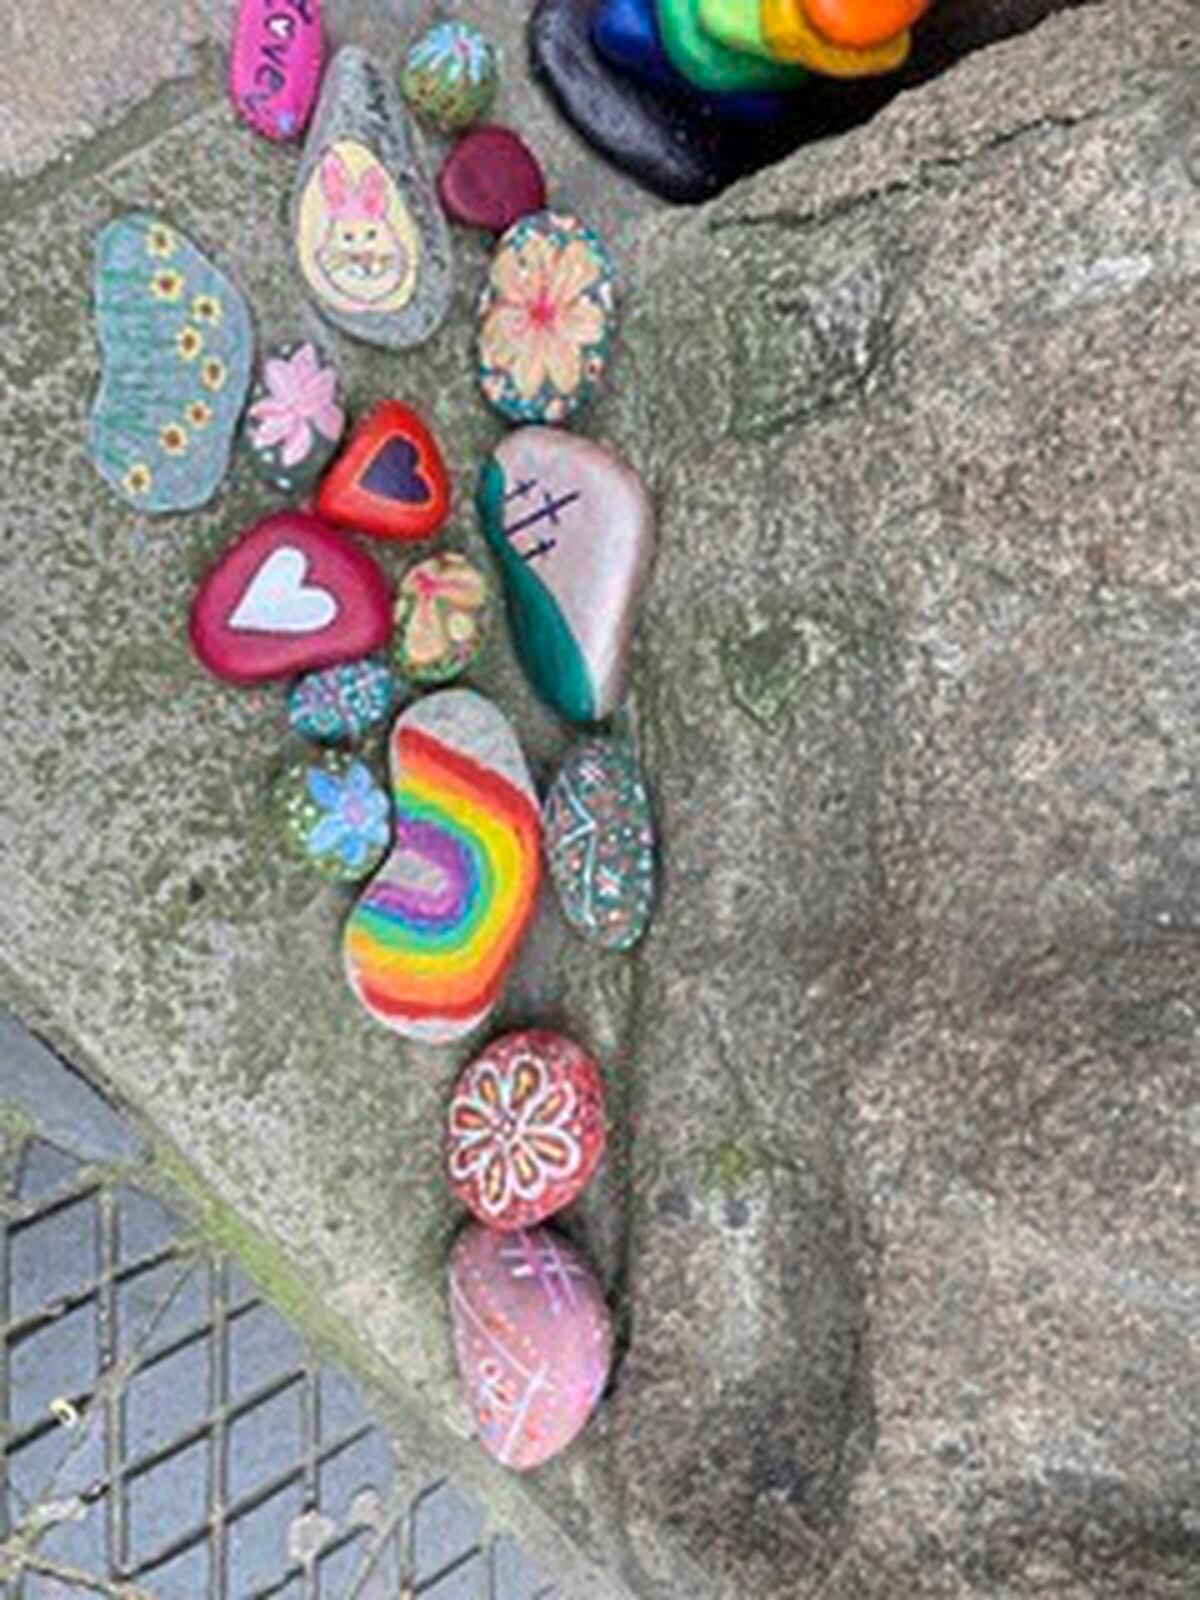 Painted pebbles from the Town Church community art gallery. Image supplied by Ruth Abernethy. (28254834)